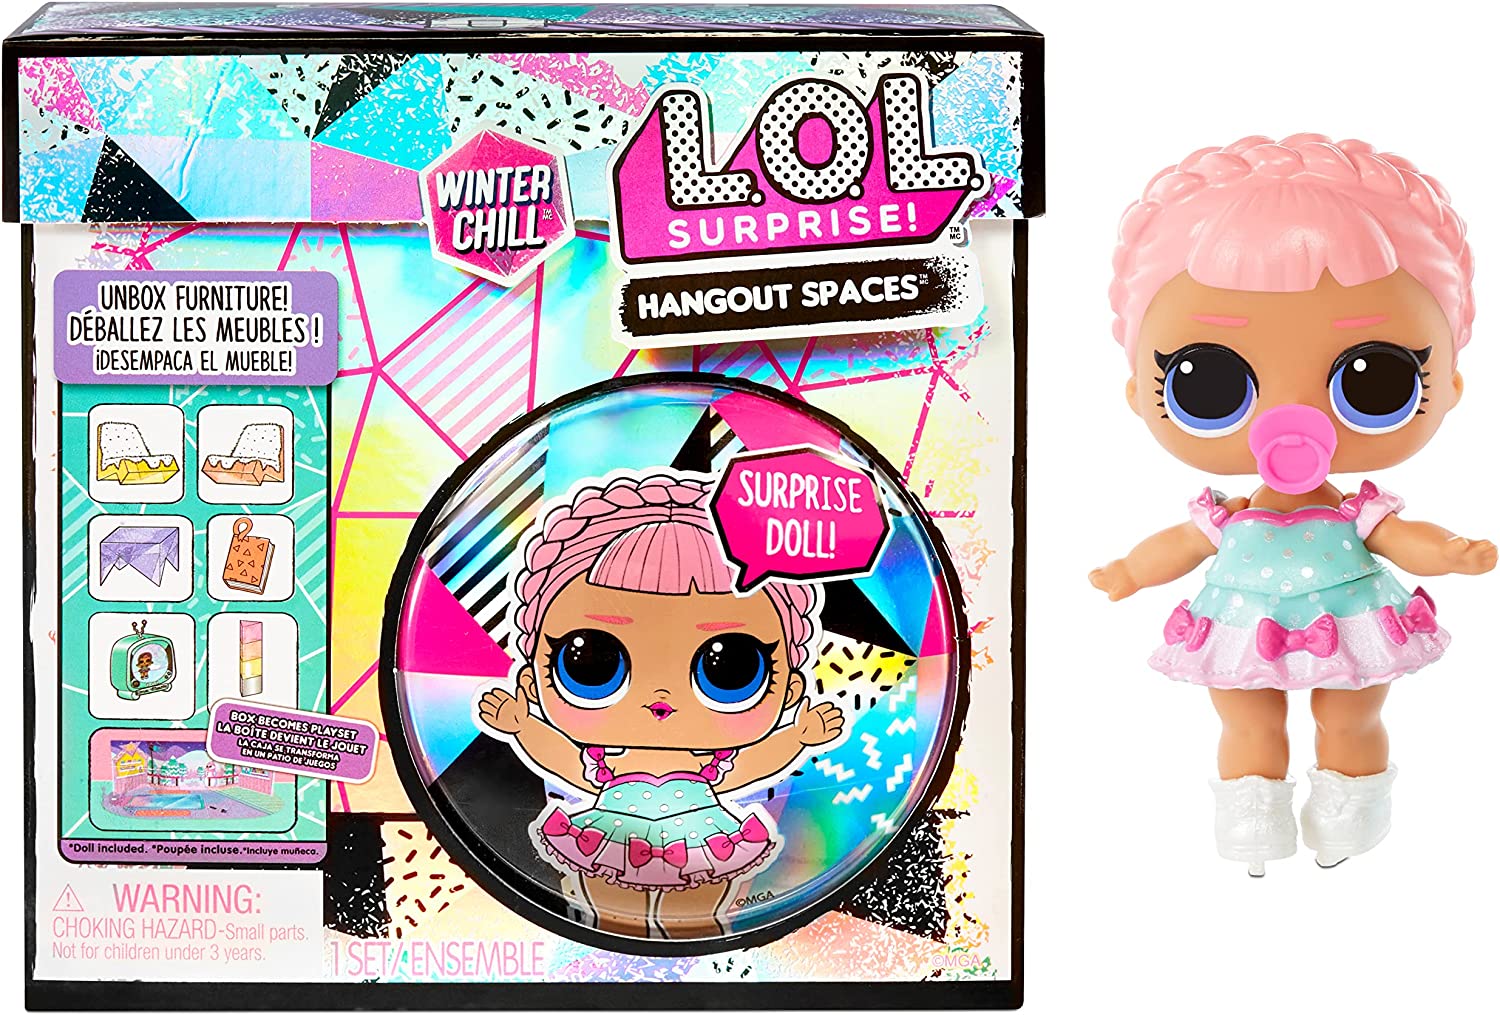 LOL Surprise Winter Chill Hangout Spaces Furniture Playset with Ice Sk8er Doll, 10+ Surprises with Accessories, for LOL Dollhouse Play- Collectible Toy